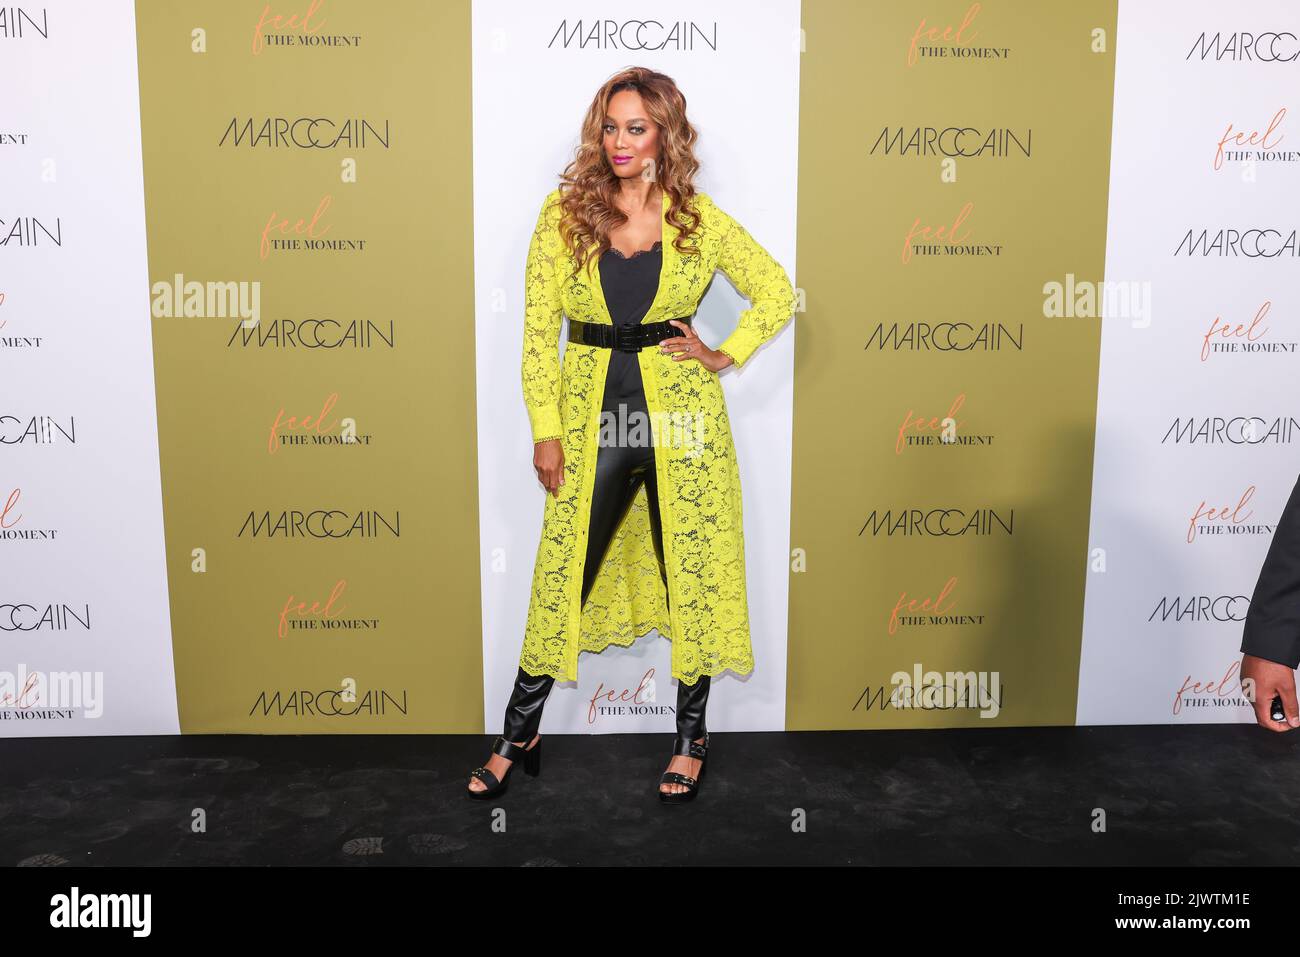 Berlin, Germany. 06th Sep, 2022. Tyra Banks arrives at the Marc Cain label's show at Mercedes-Benz Fashion Week at Café am Neuen See on the occasion of Berlin Fashion Week. The Berlin Fashion Week combines several events under one roof. Credit: Gerald Matzka/dpa/Alamy Live News Stock Photo